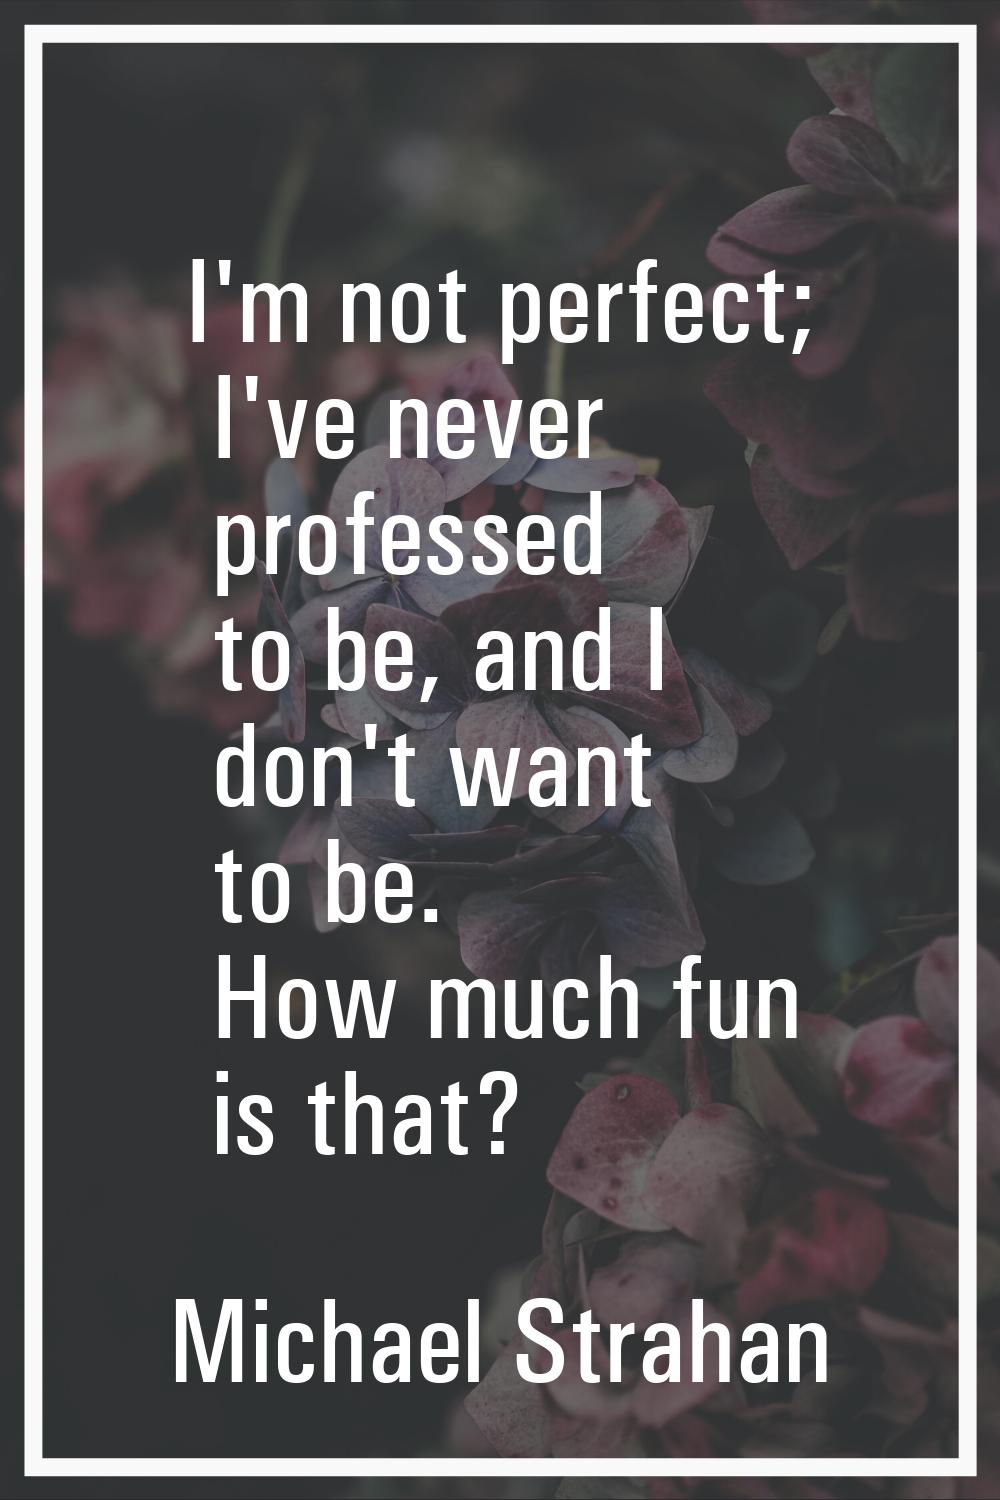 I'm not perfect; I've never professed to be, and I don't want to be. How much fun is that?